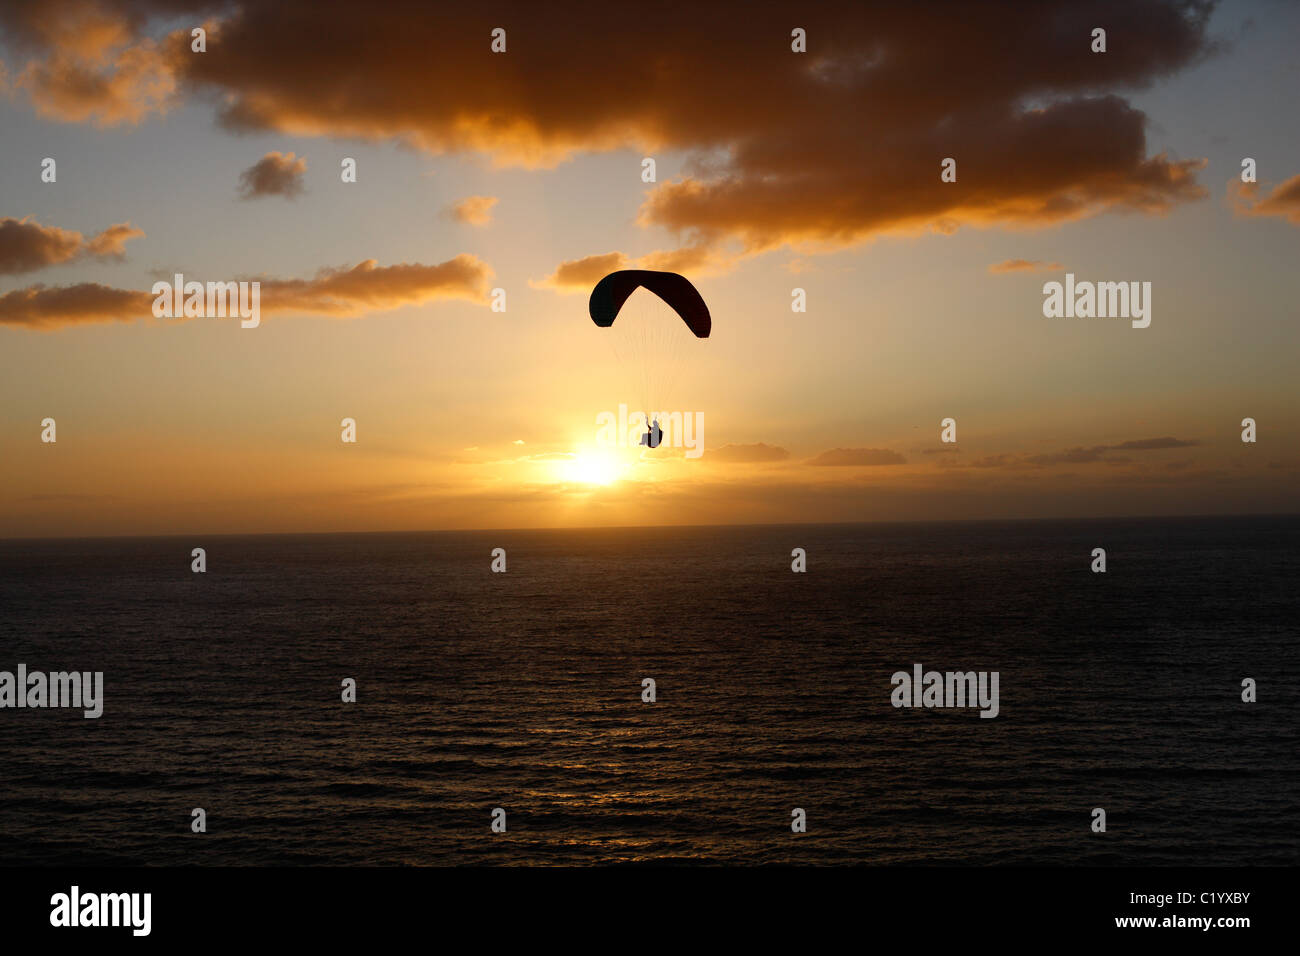 Paraglider soaring above the Pacific Ocean at sunset. Torrey Pines Gliderport, San Diego, California, USA. Stock Photo